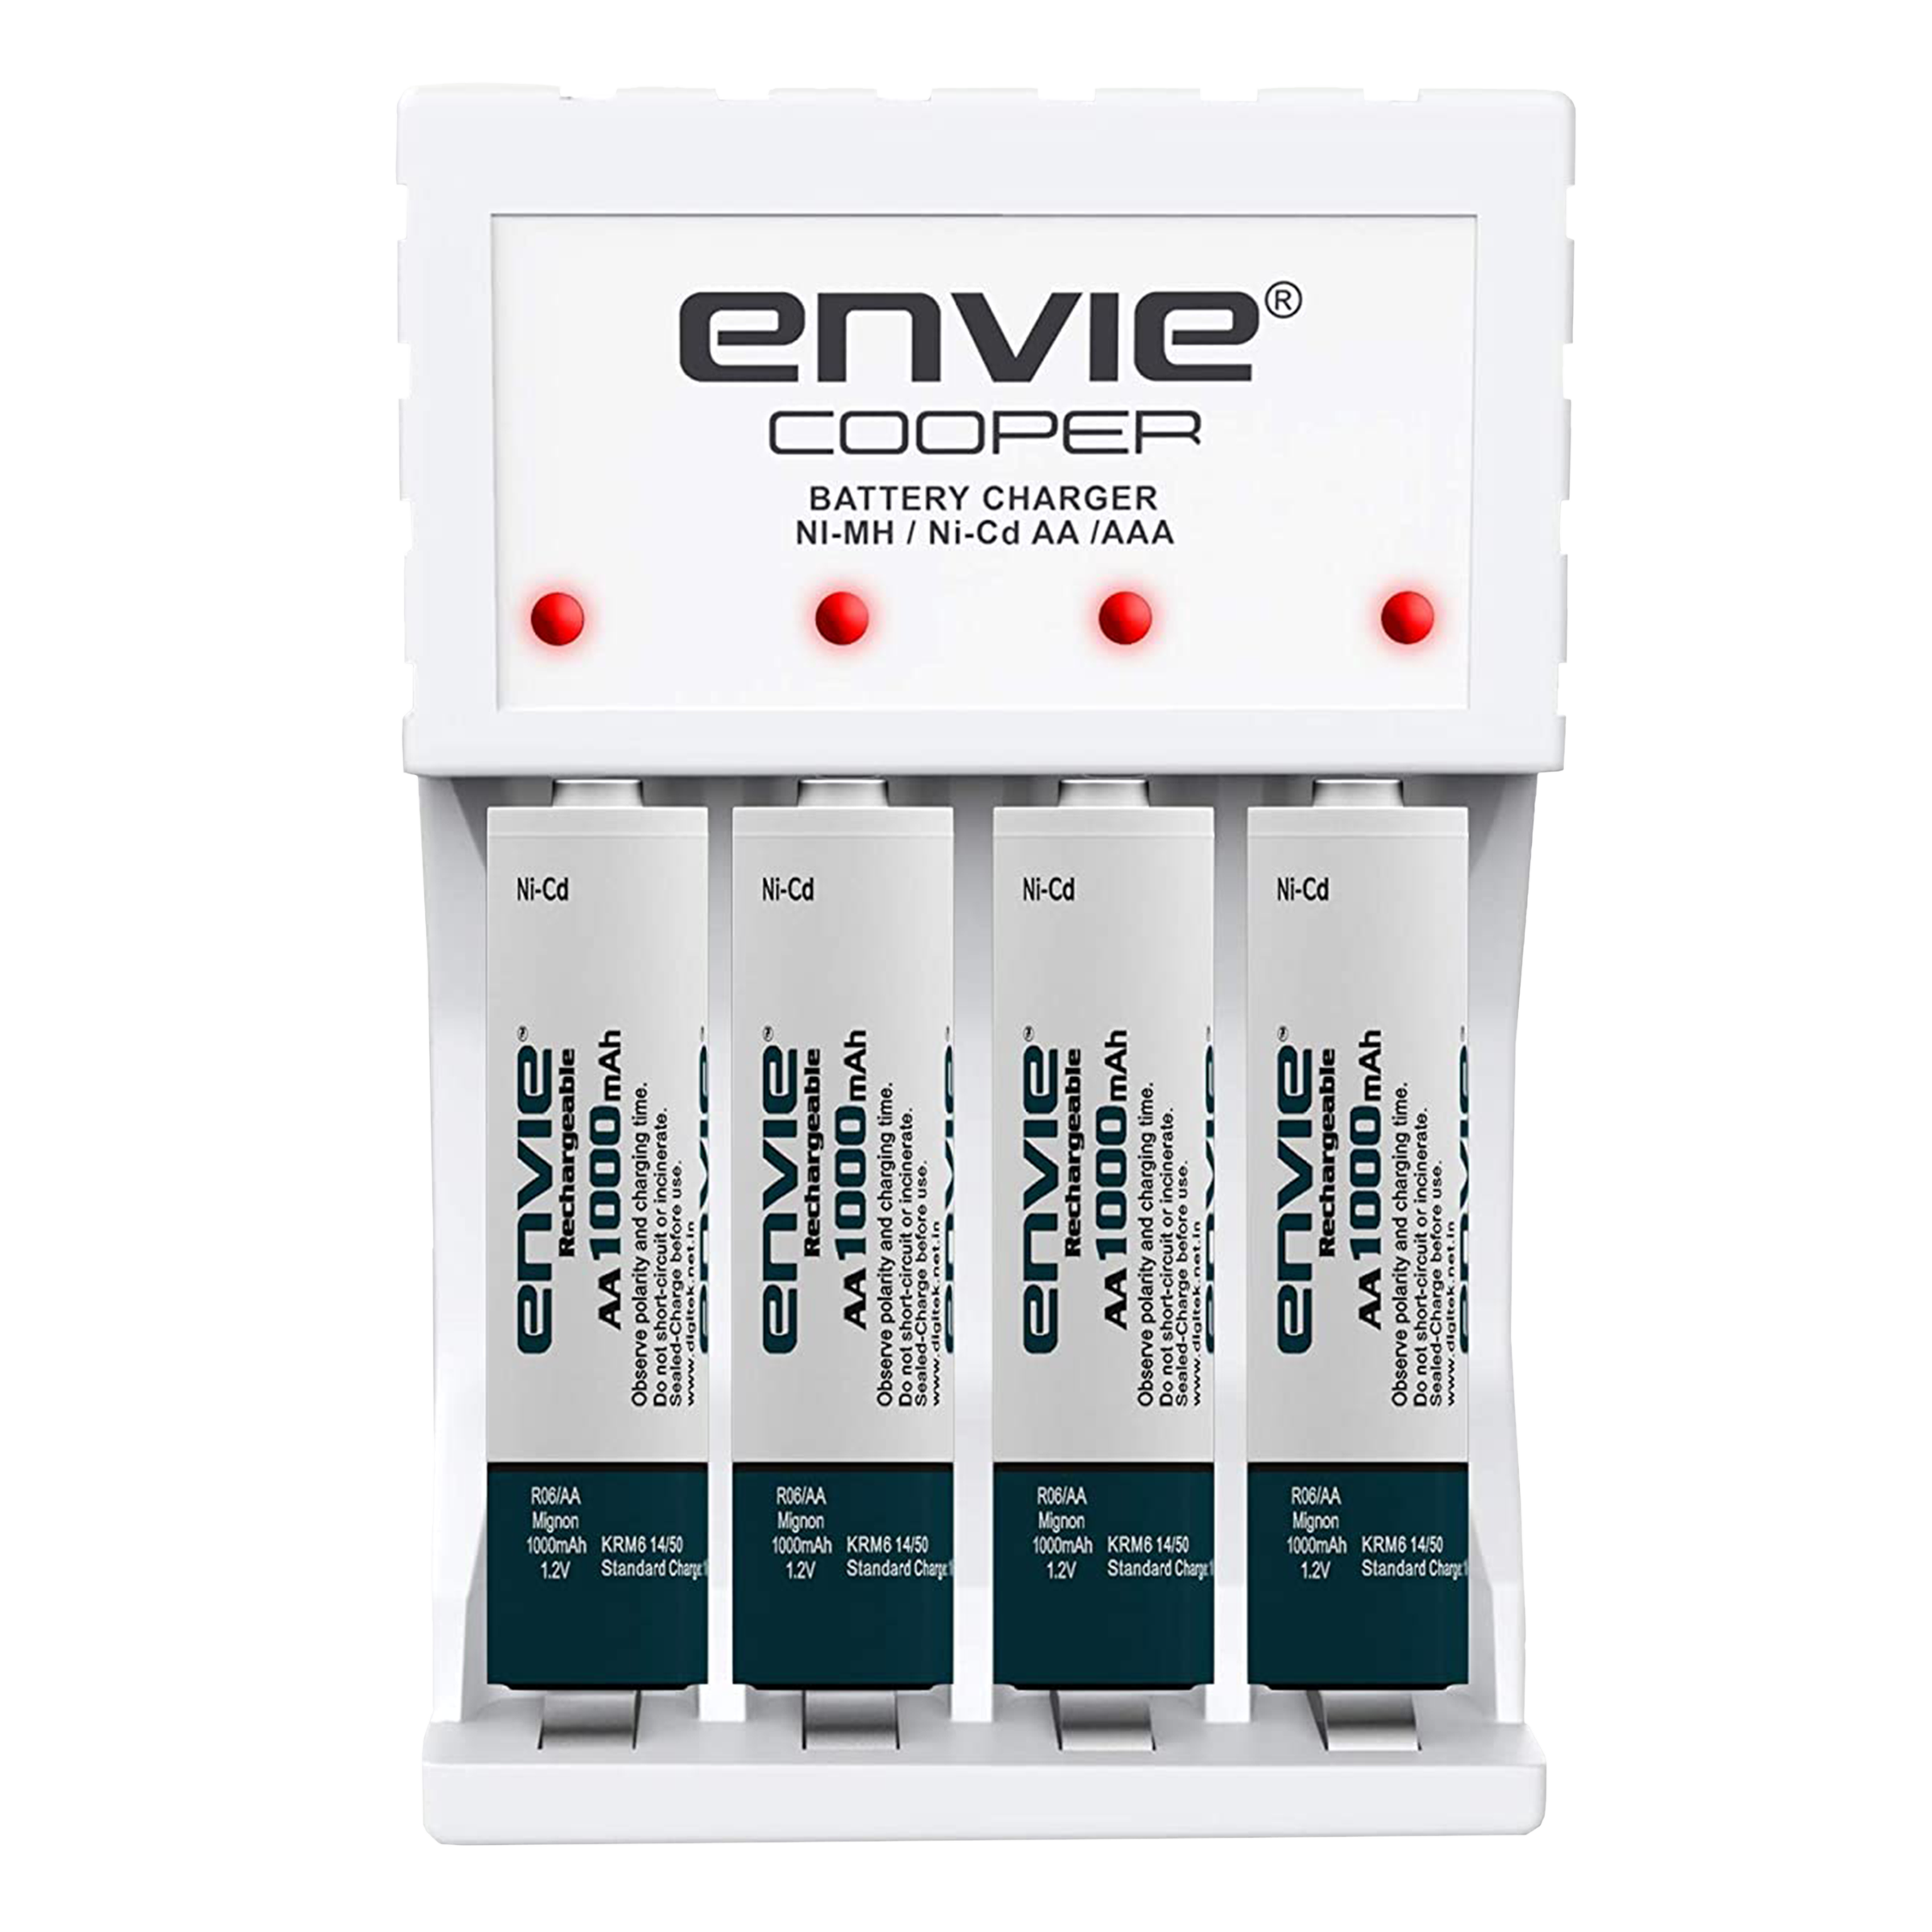 envie Cooper ECR-20 MC Camera Battery Charger Combo for AA1000 (4-Ports, Short Circuit Protection)